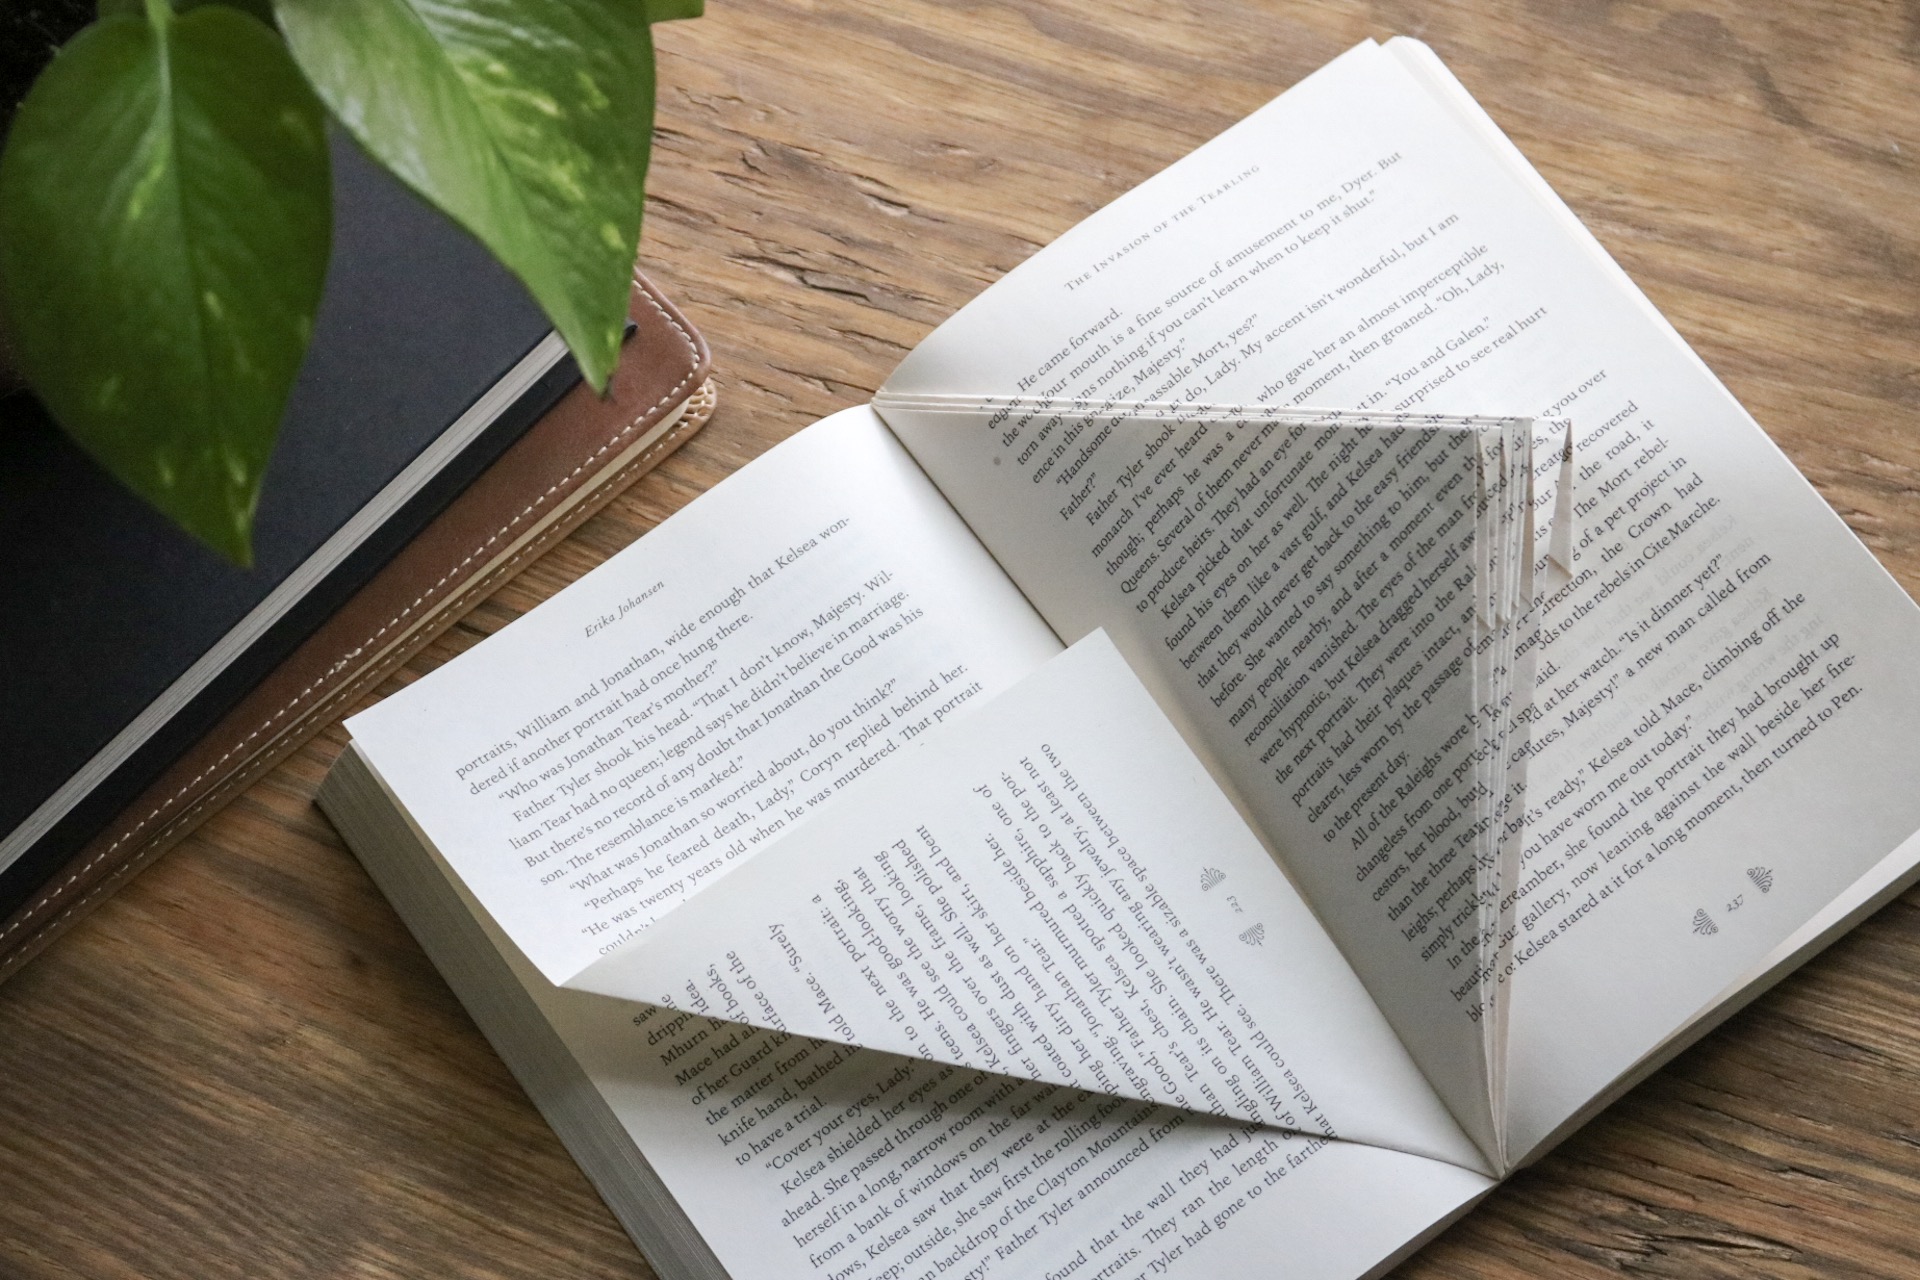 DIY Upcycled Folded Book Sculptures - Take old books or damaged books and turn them into a work or art by creating folded book art paper sculptures!  #falldiy #paper #bookworm #homedecor #falldecor #backtoschool #origami #papersculpture